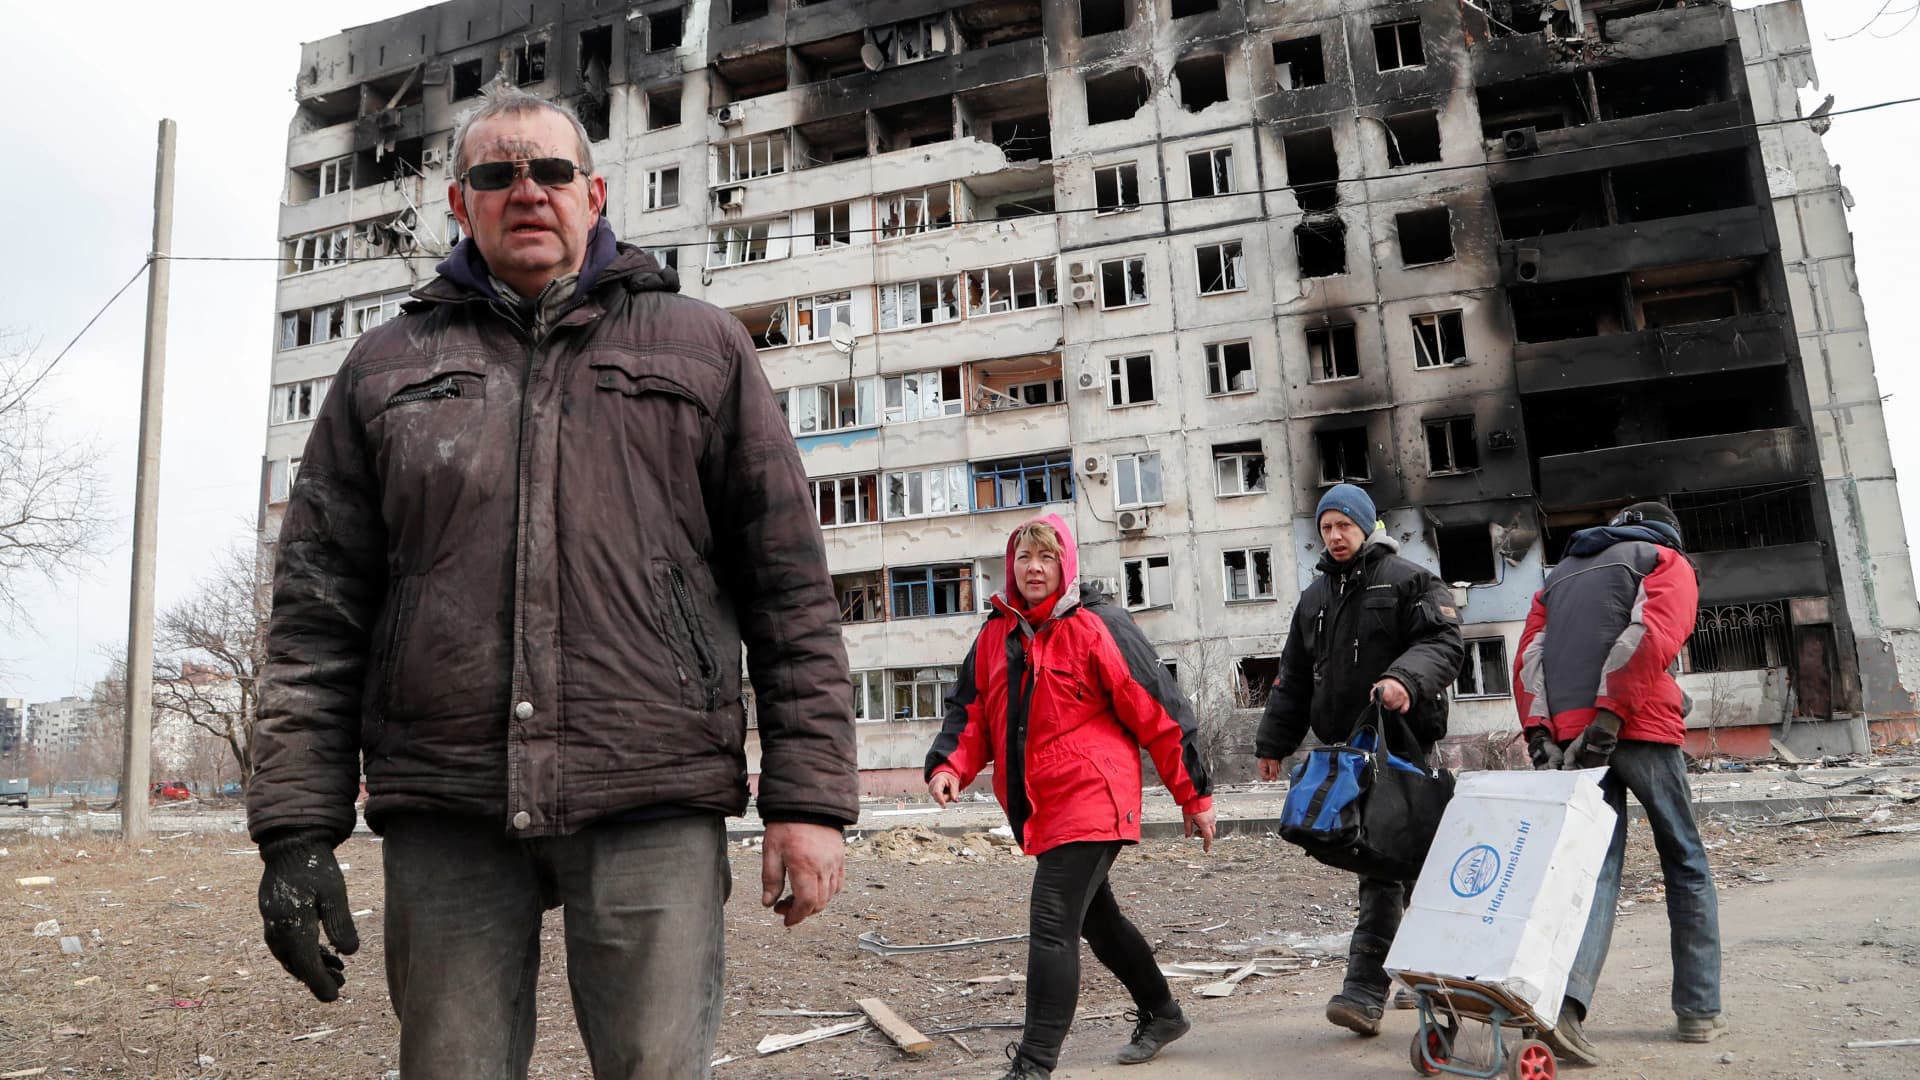 People walk near a block of flats, which was destroyed during Ukraine-Russia conflict in the besieged southern port city of Mariupol, Ukraine March 17, 2022.